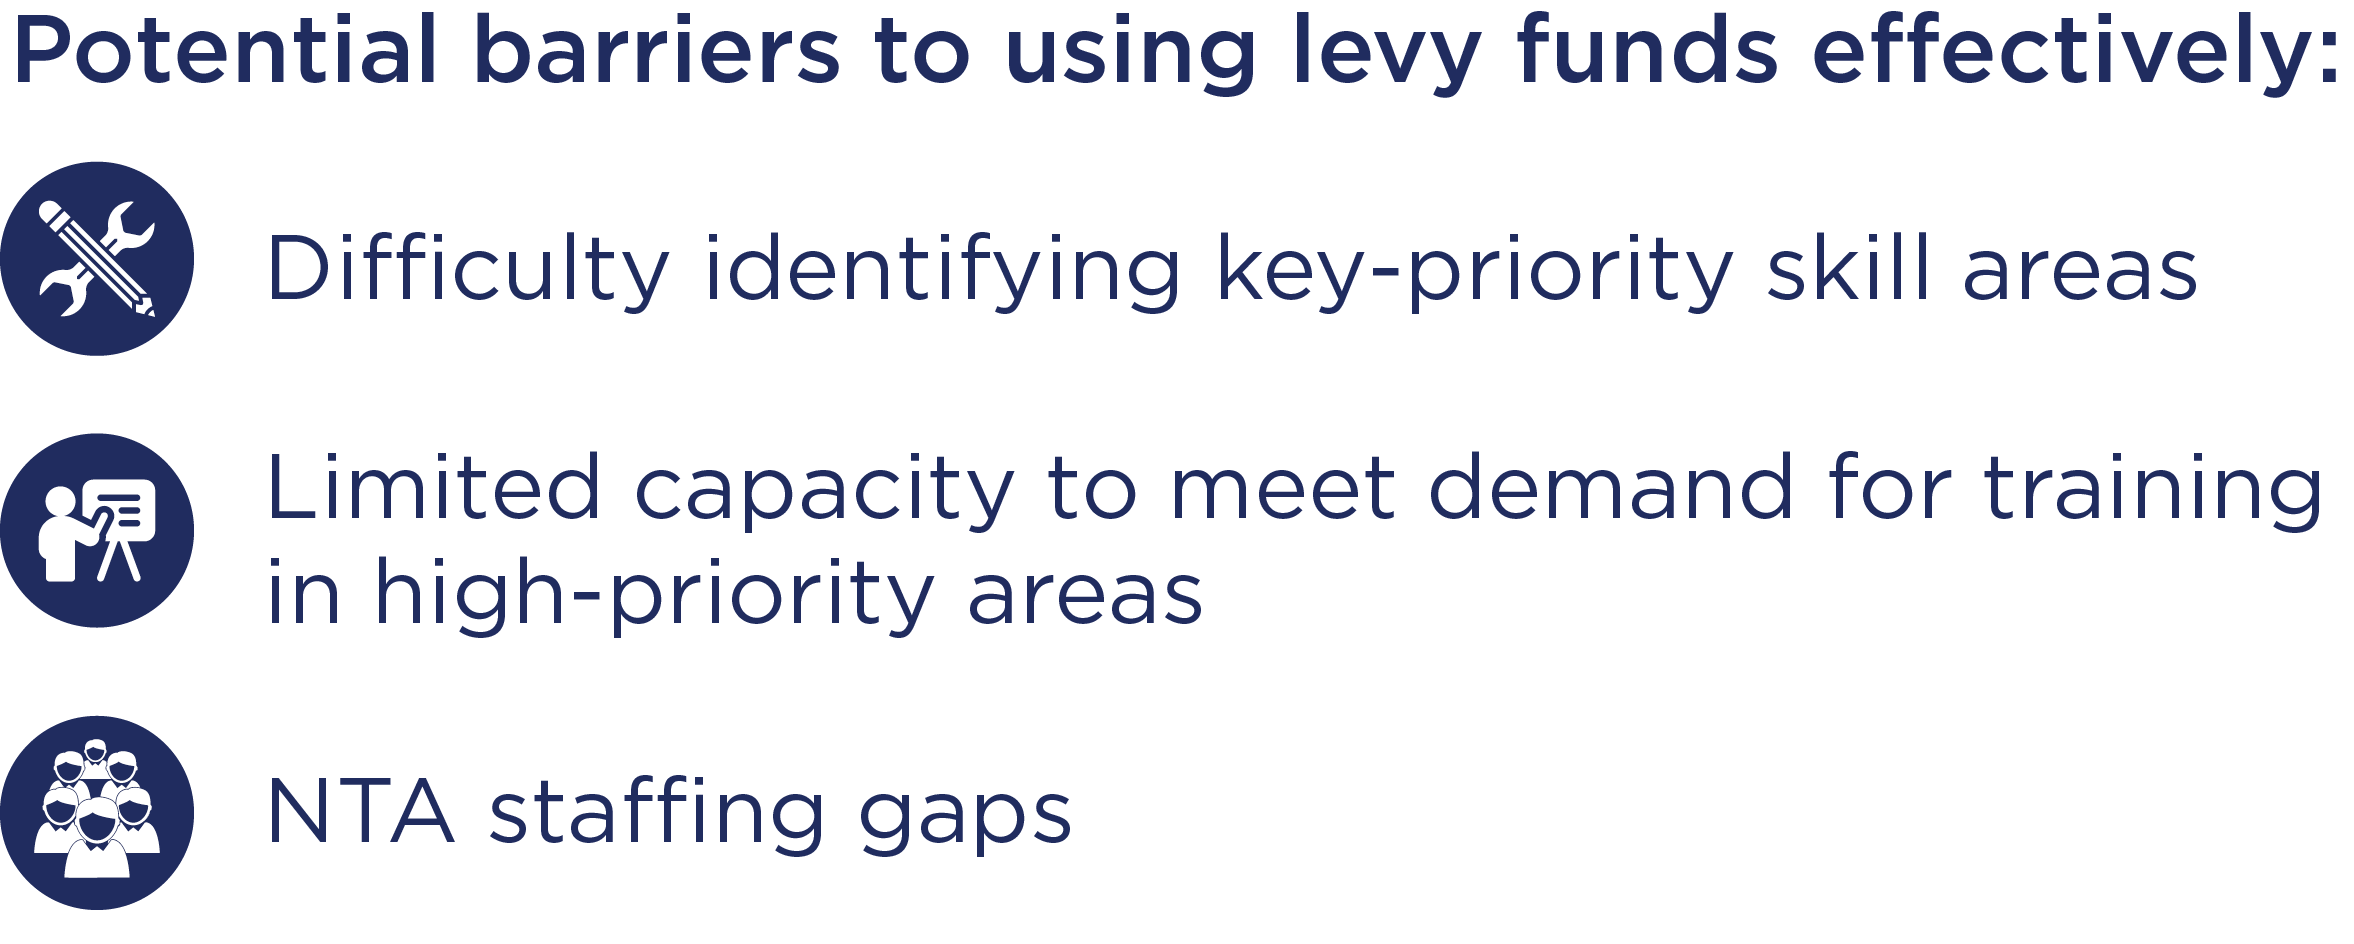 barriers to levy use